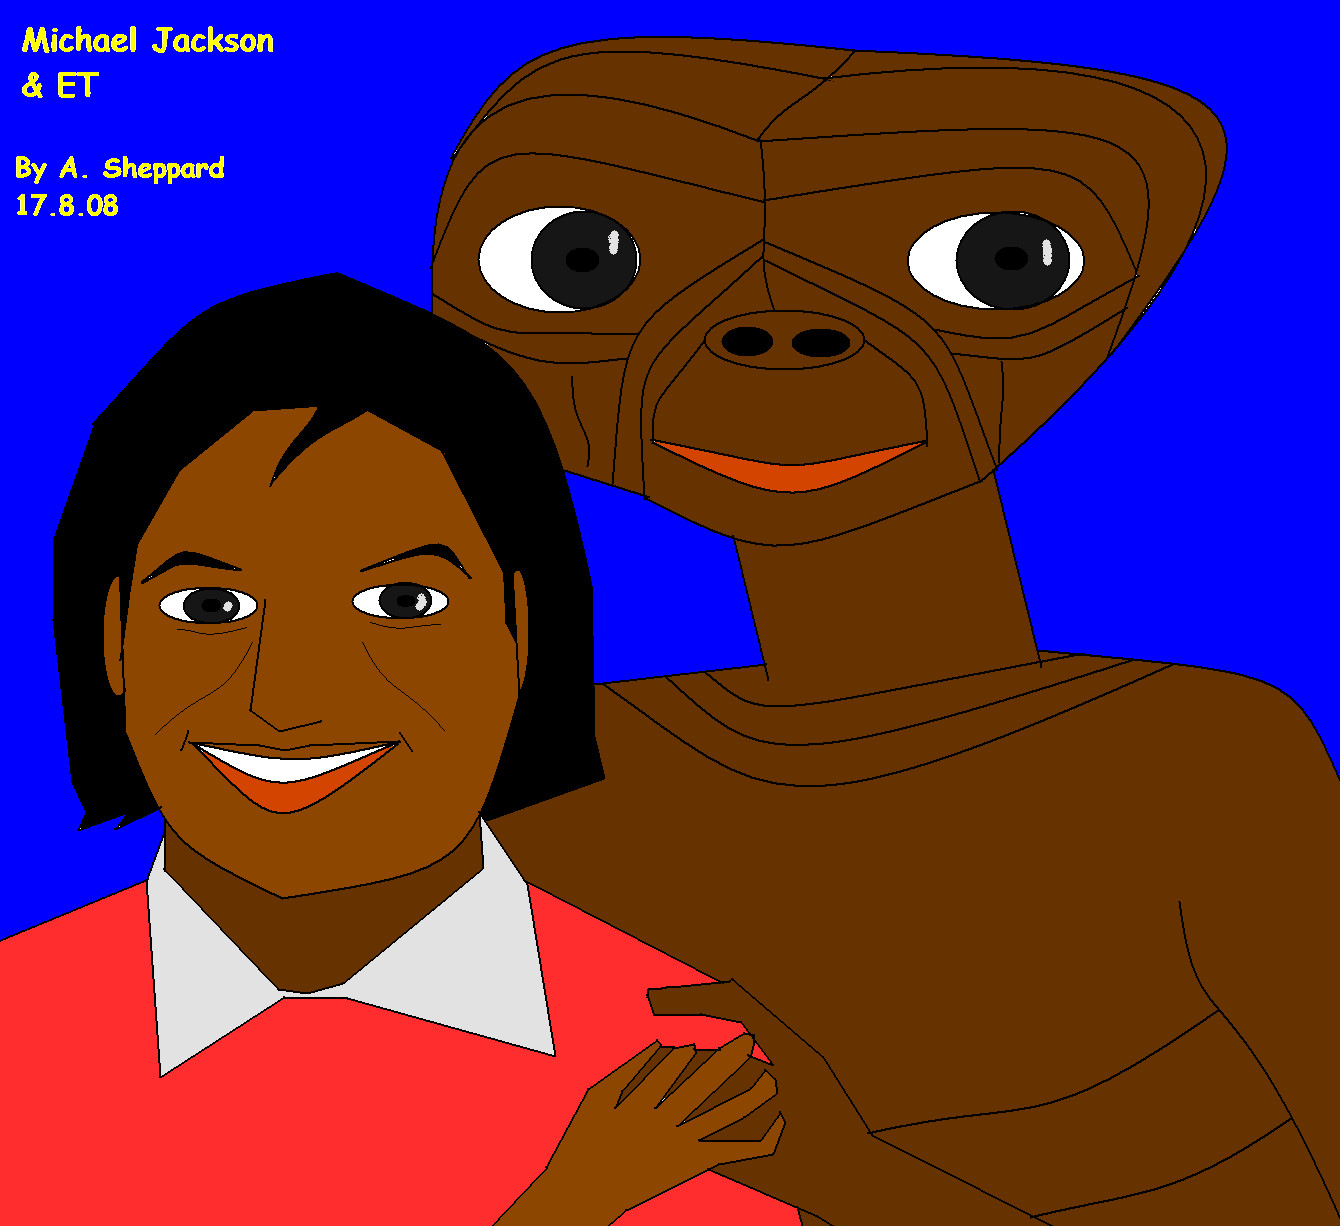 Mjj and ET by adsheppard